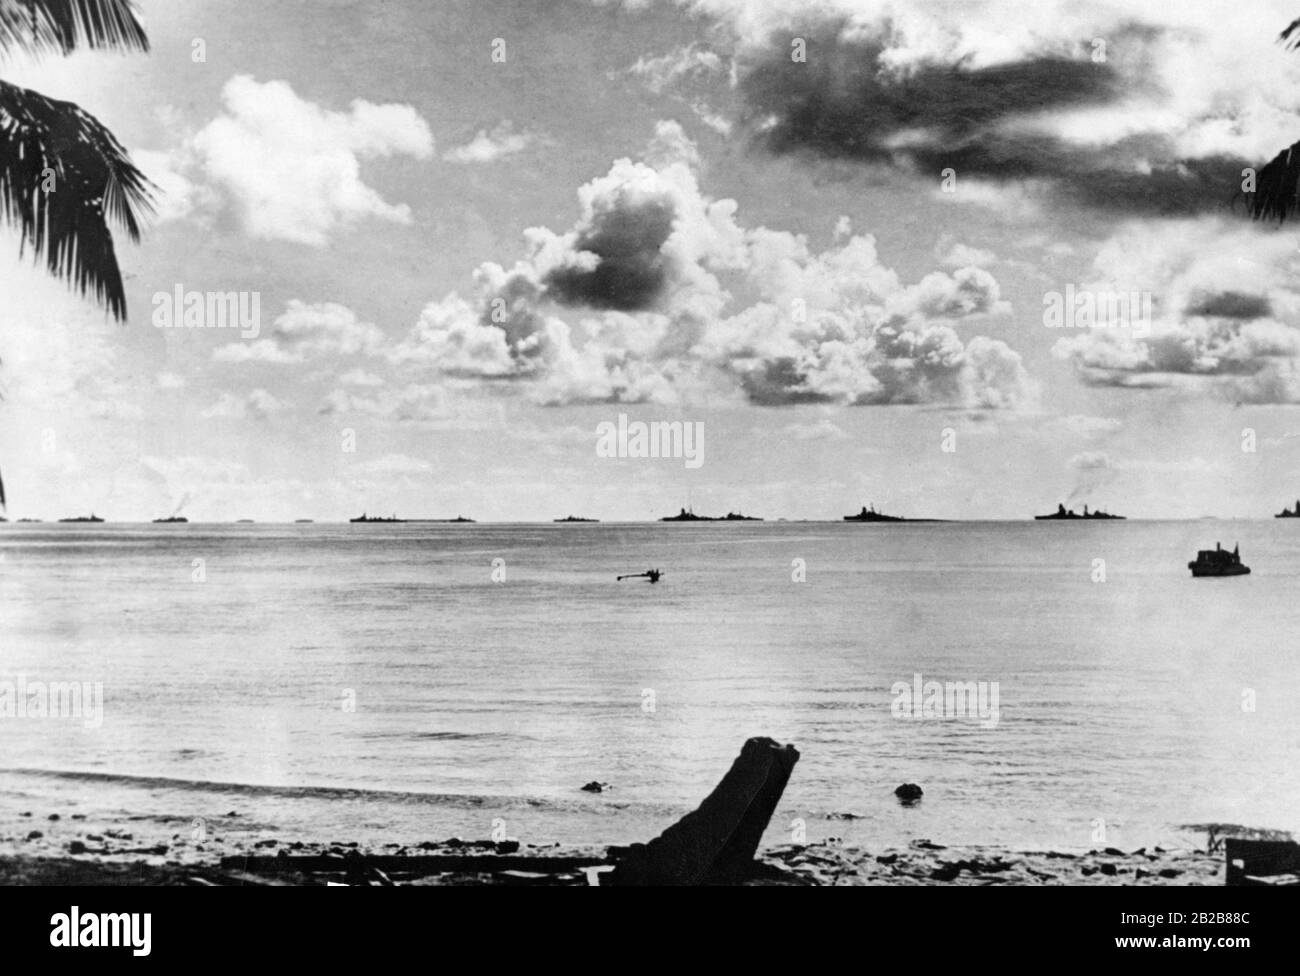 View from an island in the South Sea over the sea. On the horizon there are several ships of the Imperial Japanese Navy. This part of the South Seas was under the control of Japan within the framework of the Japanese South Pacific Mandate. (Undated photograph, ca. 1930s) Stock Photo